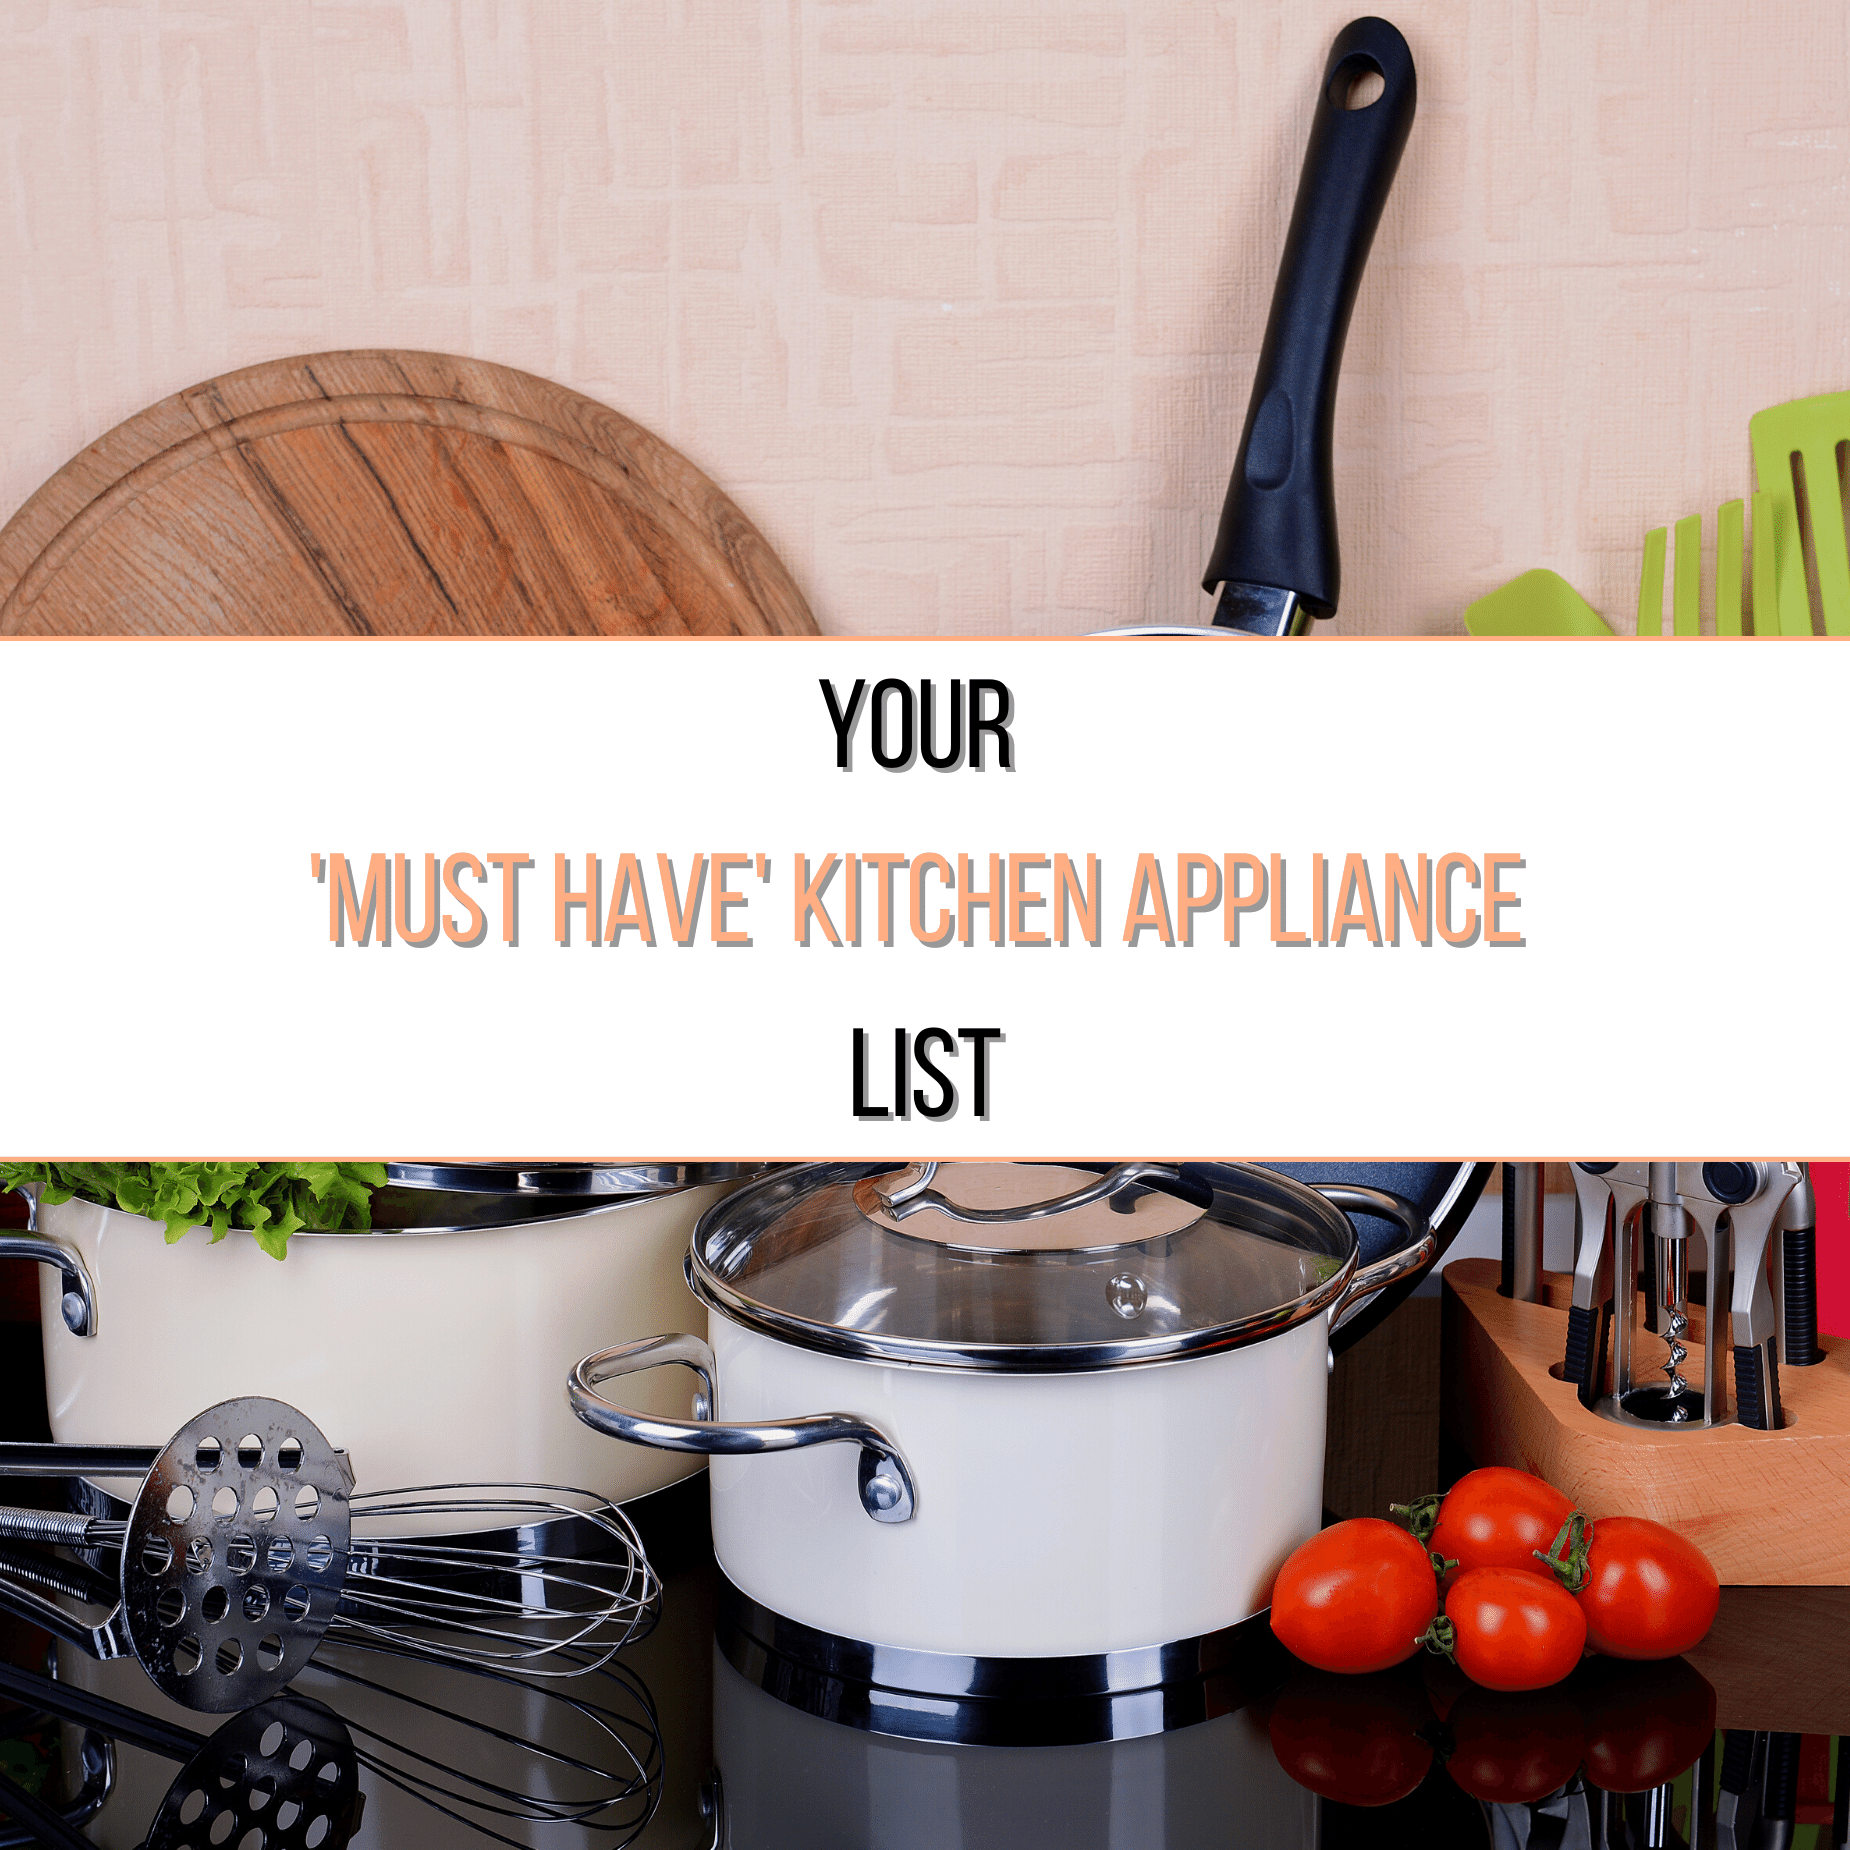 List of All the Most-Useful Kitchen Utensils